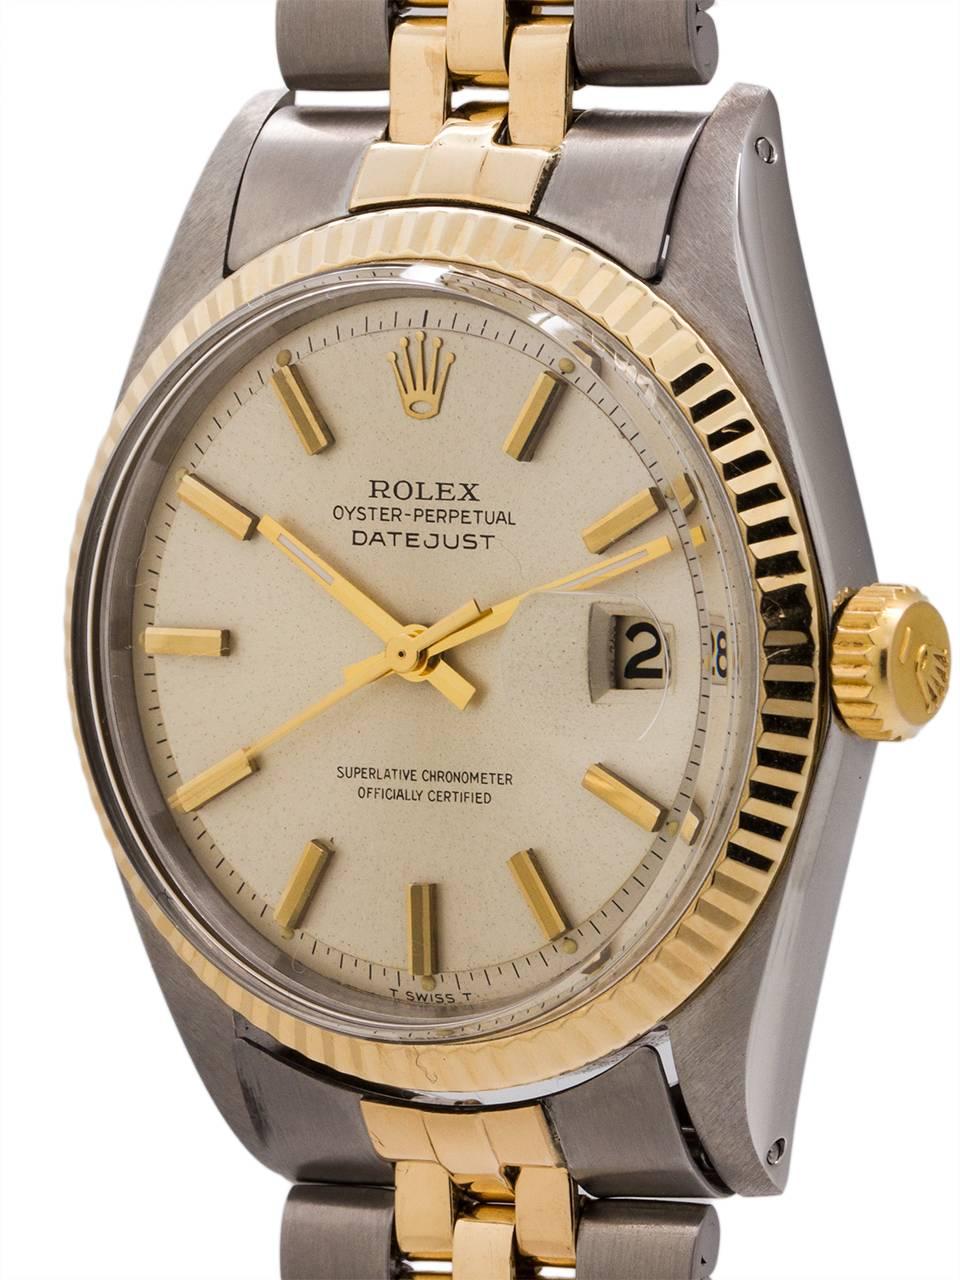 Rolex stainless steel and 14K yellow gold Oyster Perpetual Datejust ref# 1601 circa 1965. Man's full size dress model 36mm diameter Oyster case with 14K yellow gold fluted bezel, signed screw down crown and acrylic crystal. With an absolutely mint